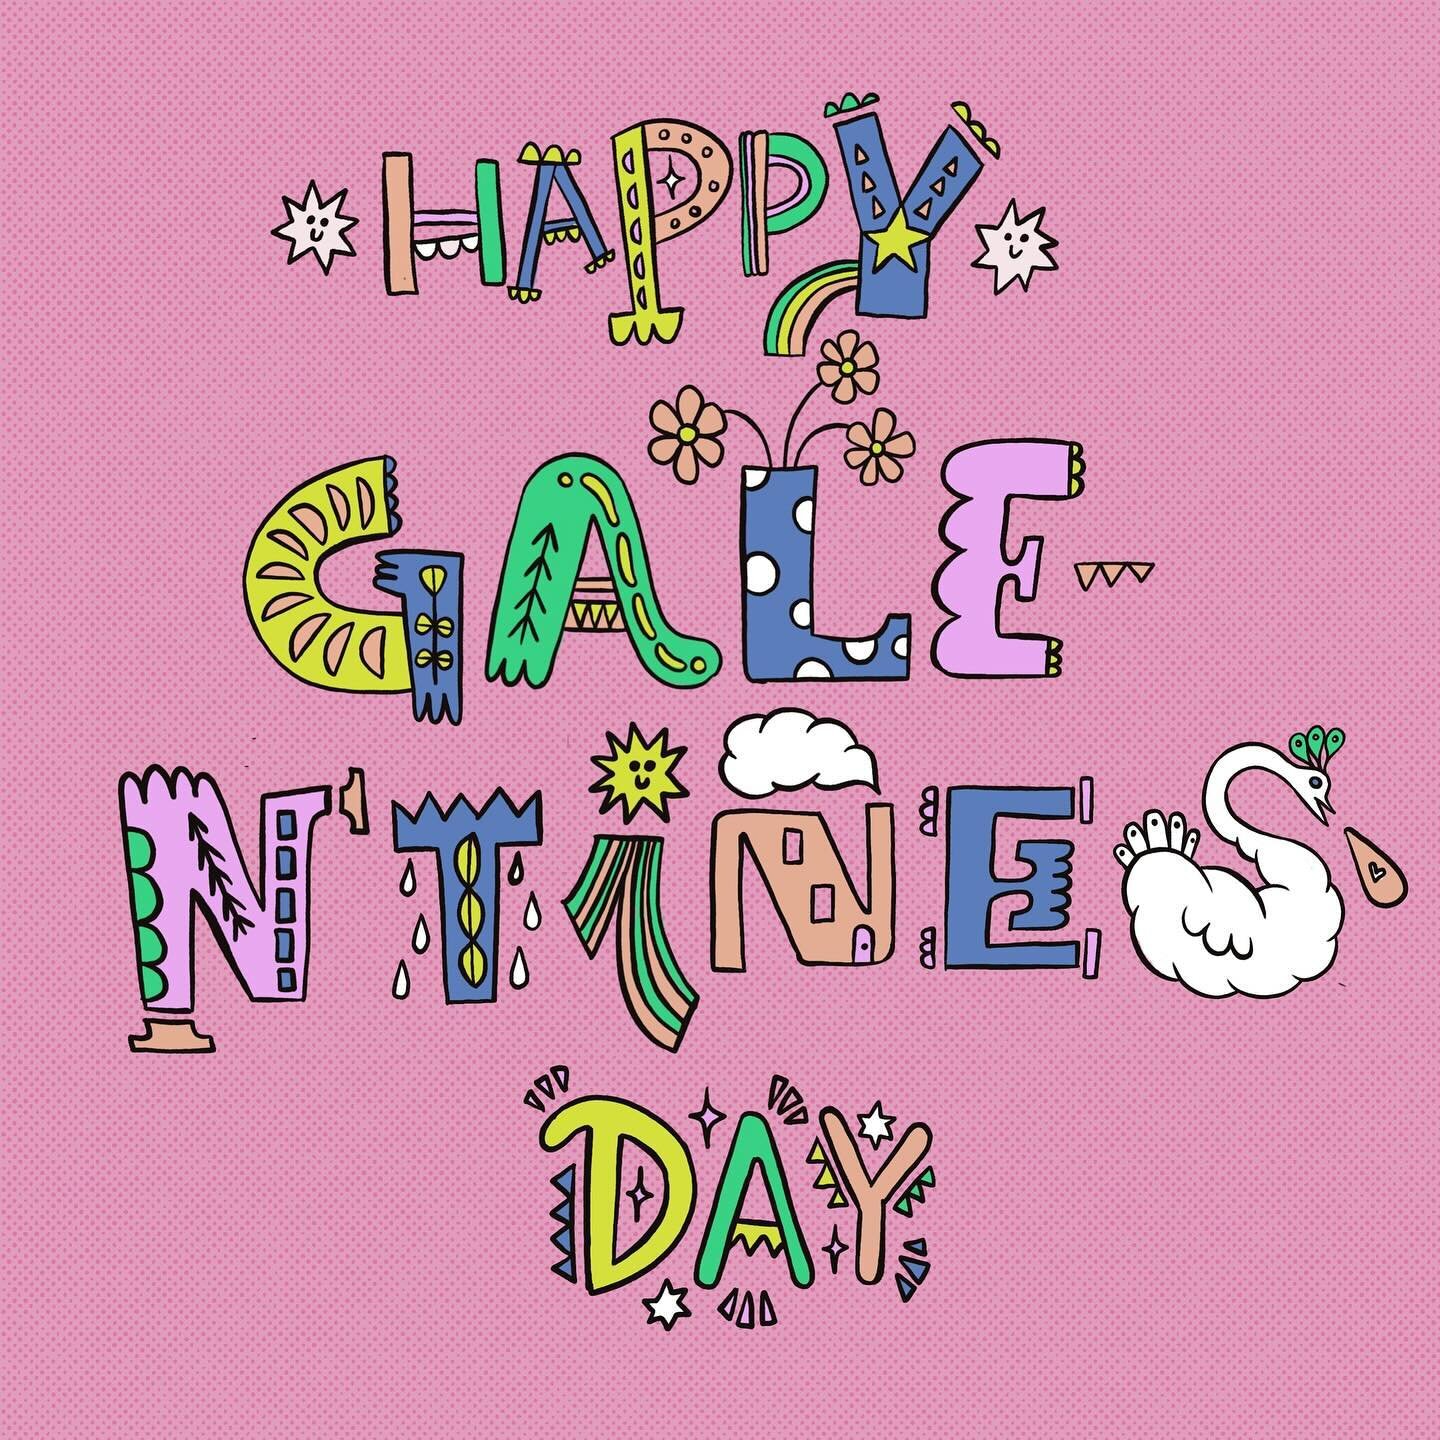 Happy #galentinesday to all the beautiful women in my life! Thank you for being awesome! ✨